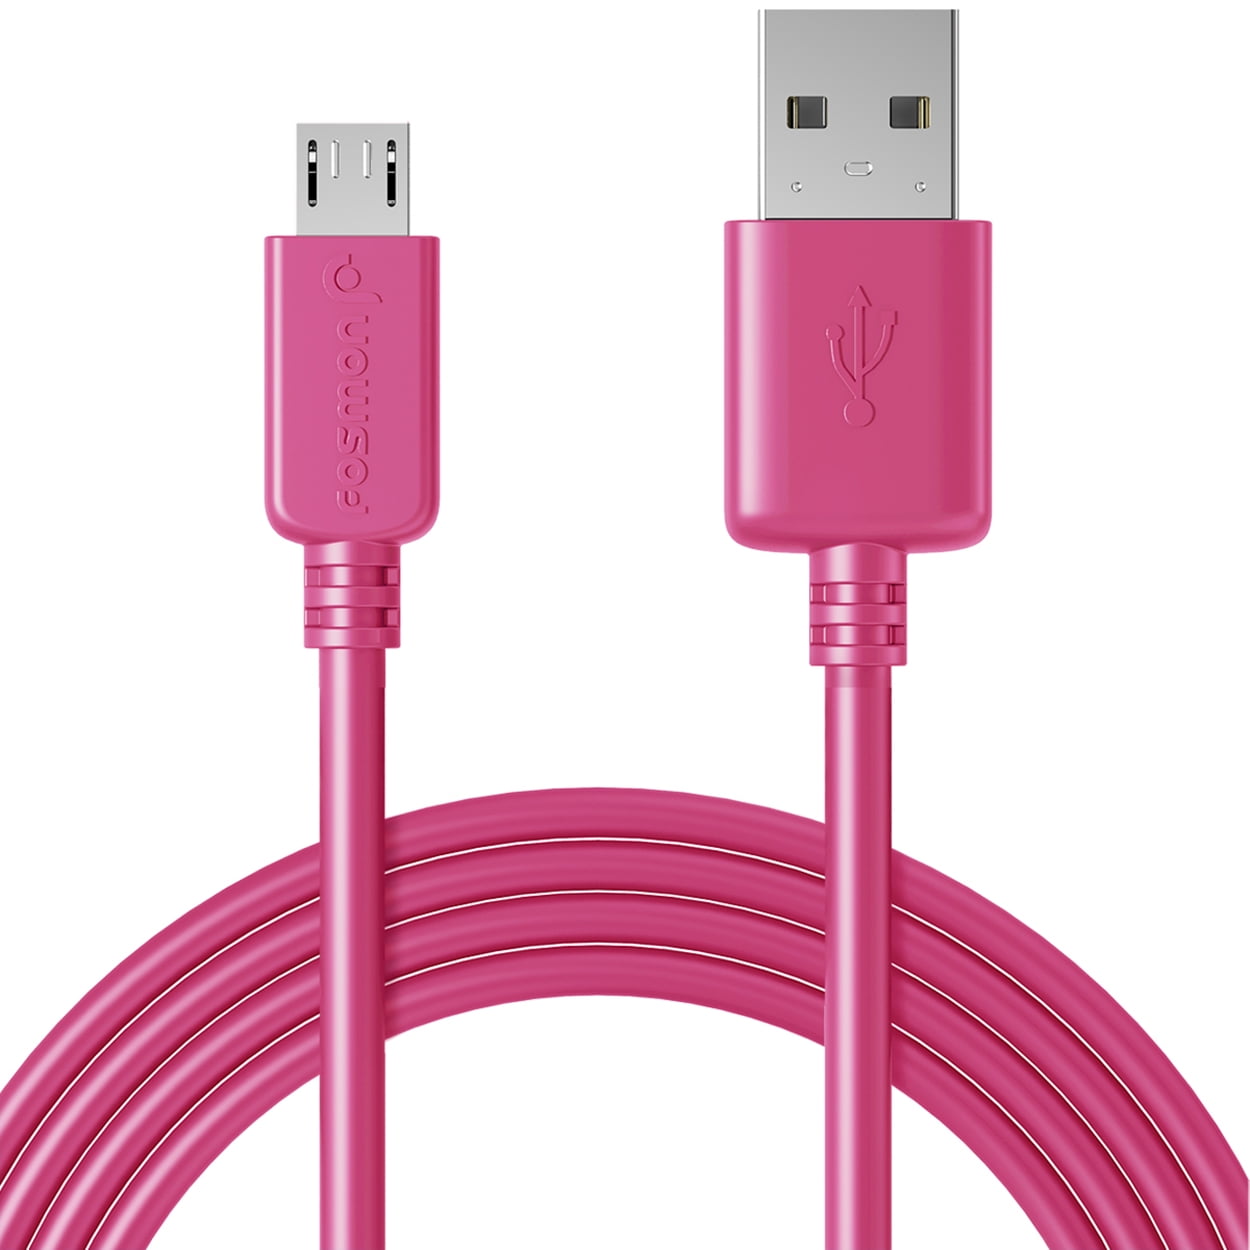 Fosmon Micro USB Cable, (6FT - Hot Pink) Ultra Durable (TPE Jacket & Housing) Sync Charge Cable for Samsung Galaxy S7 / S7 Edge / S6 / S5, Moto G/X/V, LG G4/G3, Nokia Series and More